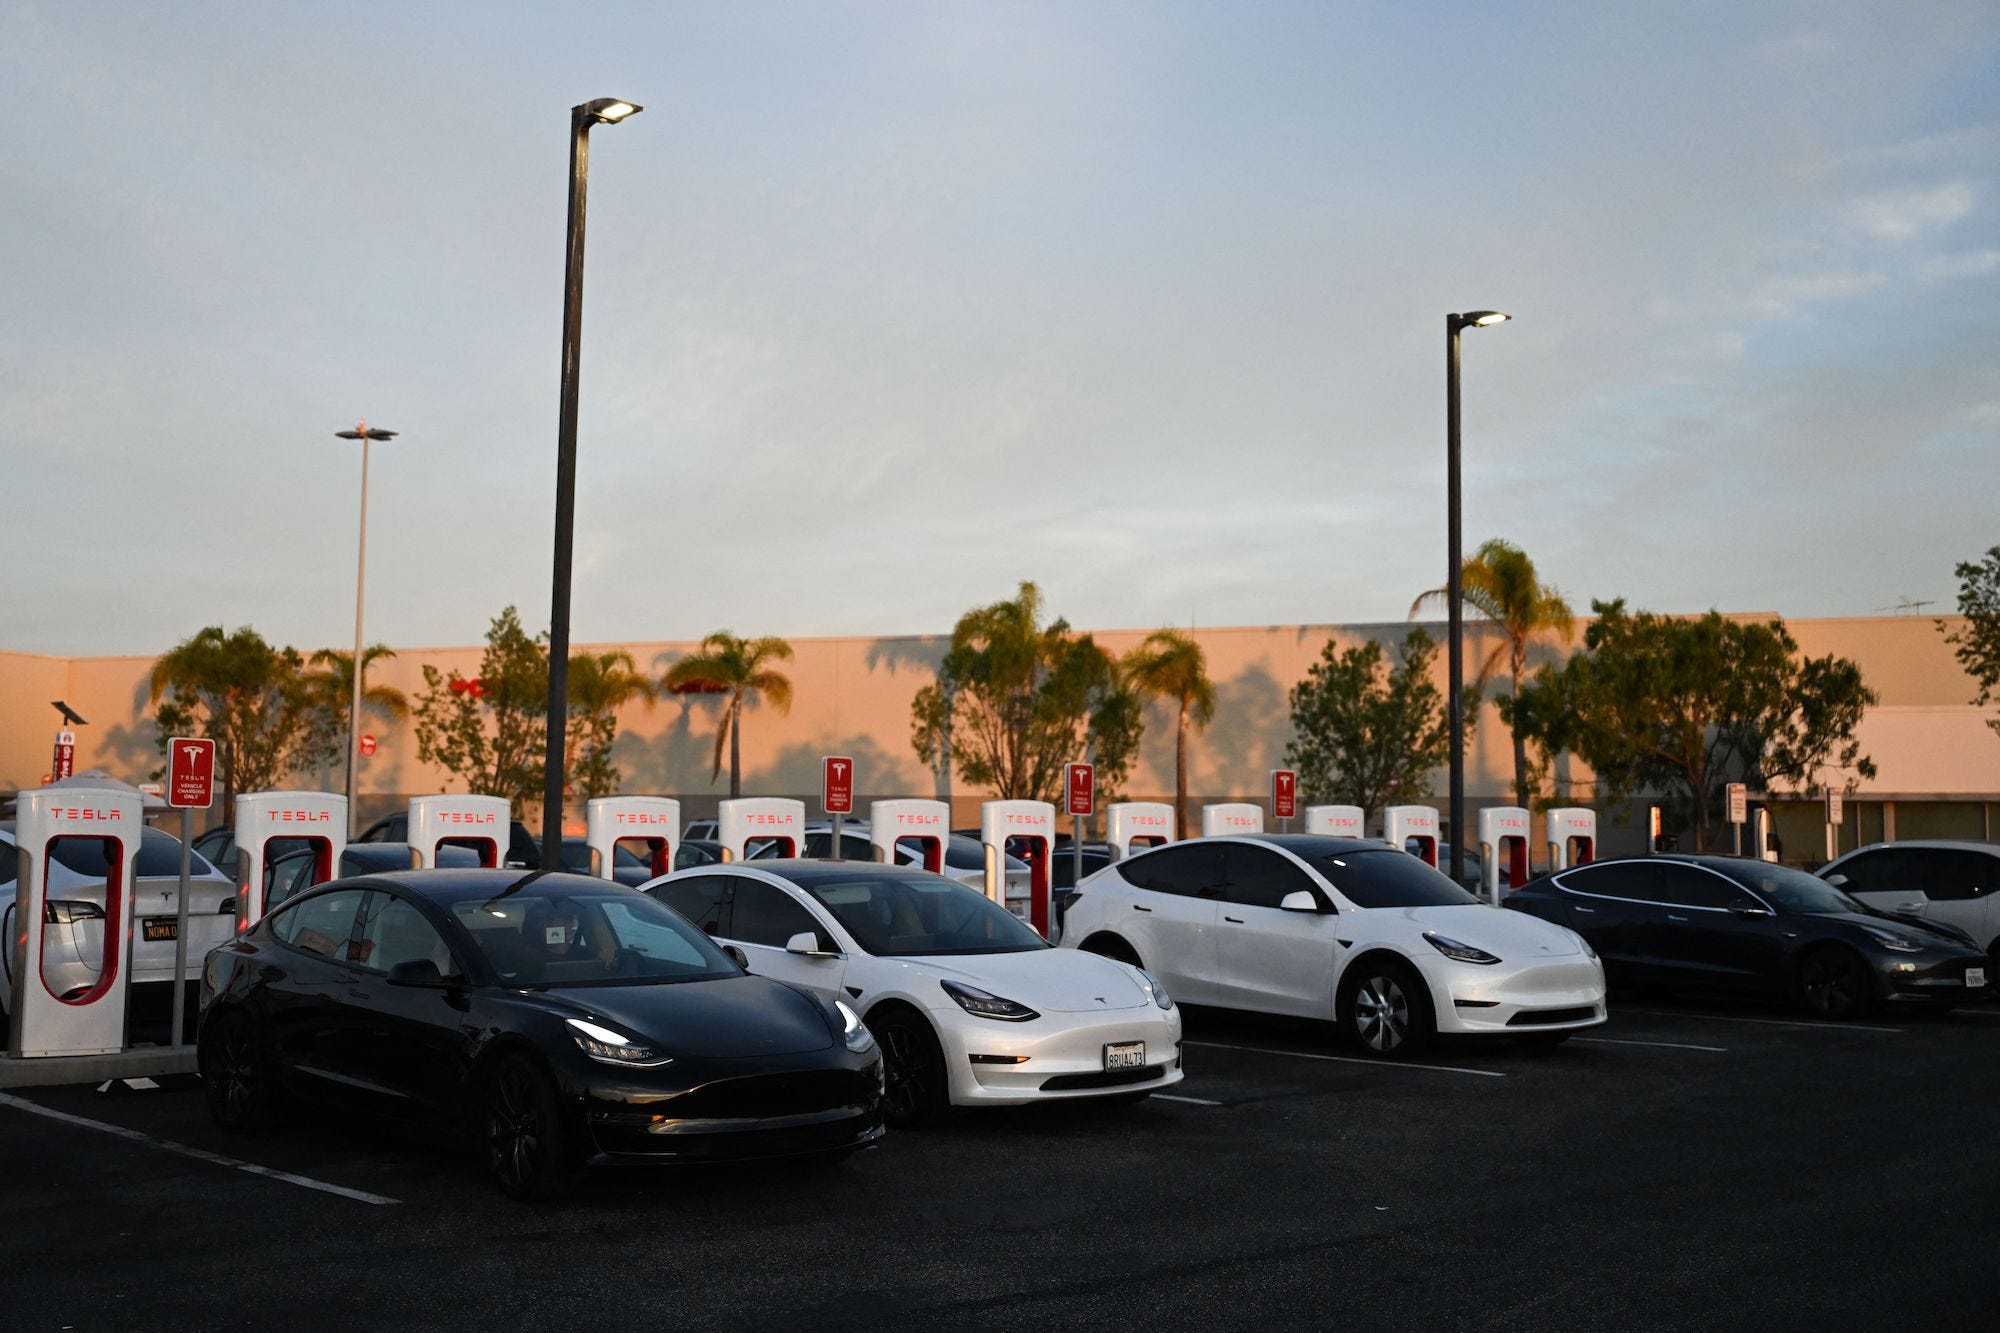 Tesla, Inc. electric vehicles charge at supercharger location in Hawthorne, California, on August 9, 2022.